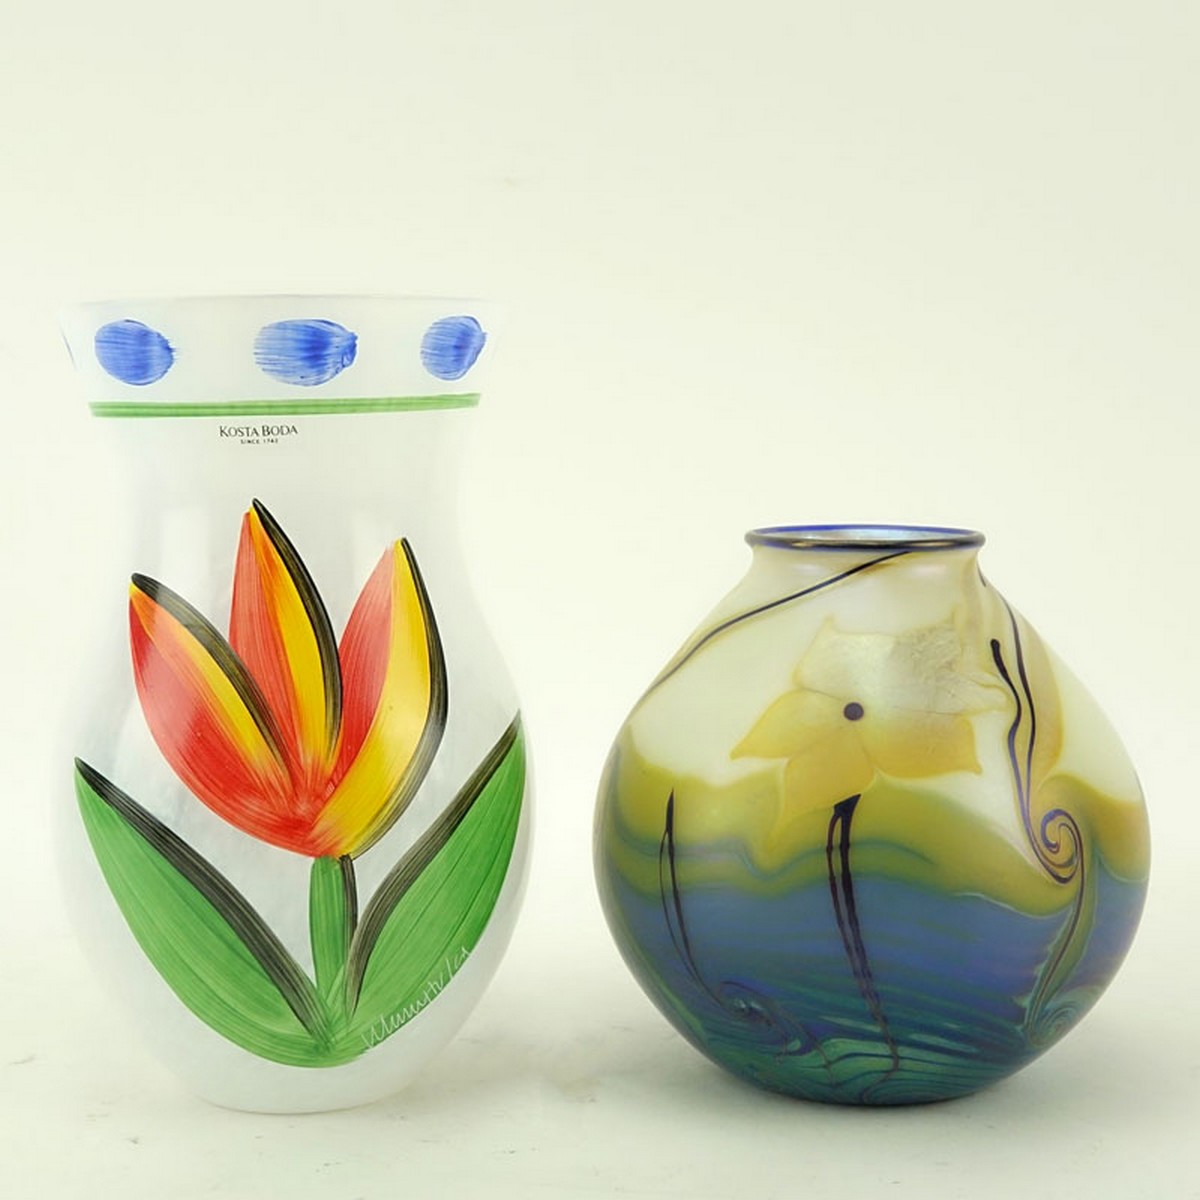 Grouping of Two (2): Kosta Boda Tulipa Vase, Orient and Flume Art Glass Vase. Each appropriately signed, Kosta Boda has original sticker attached.